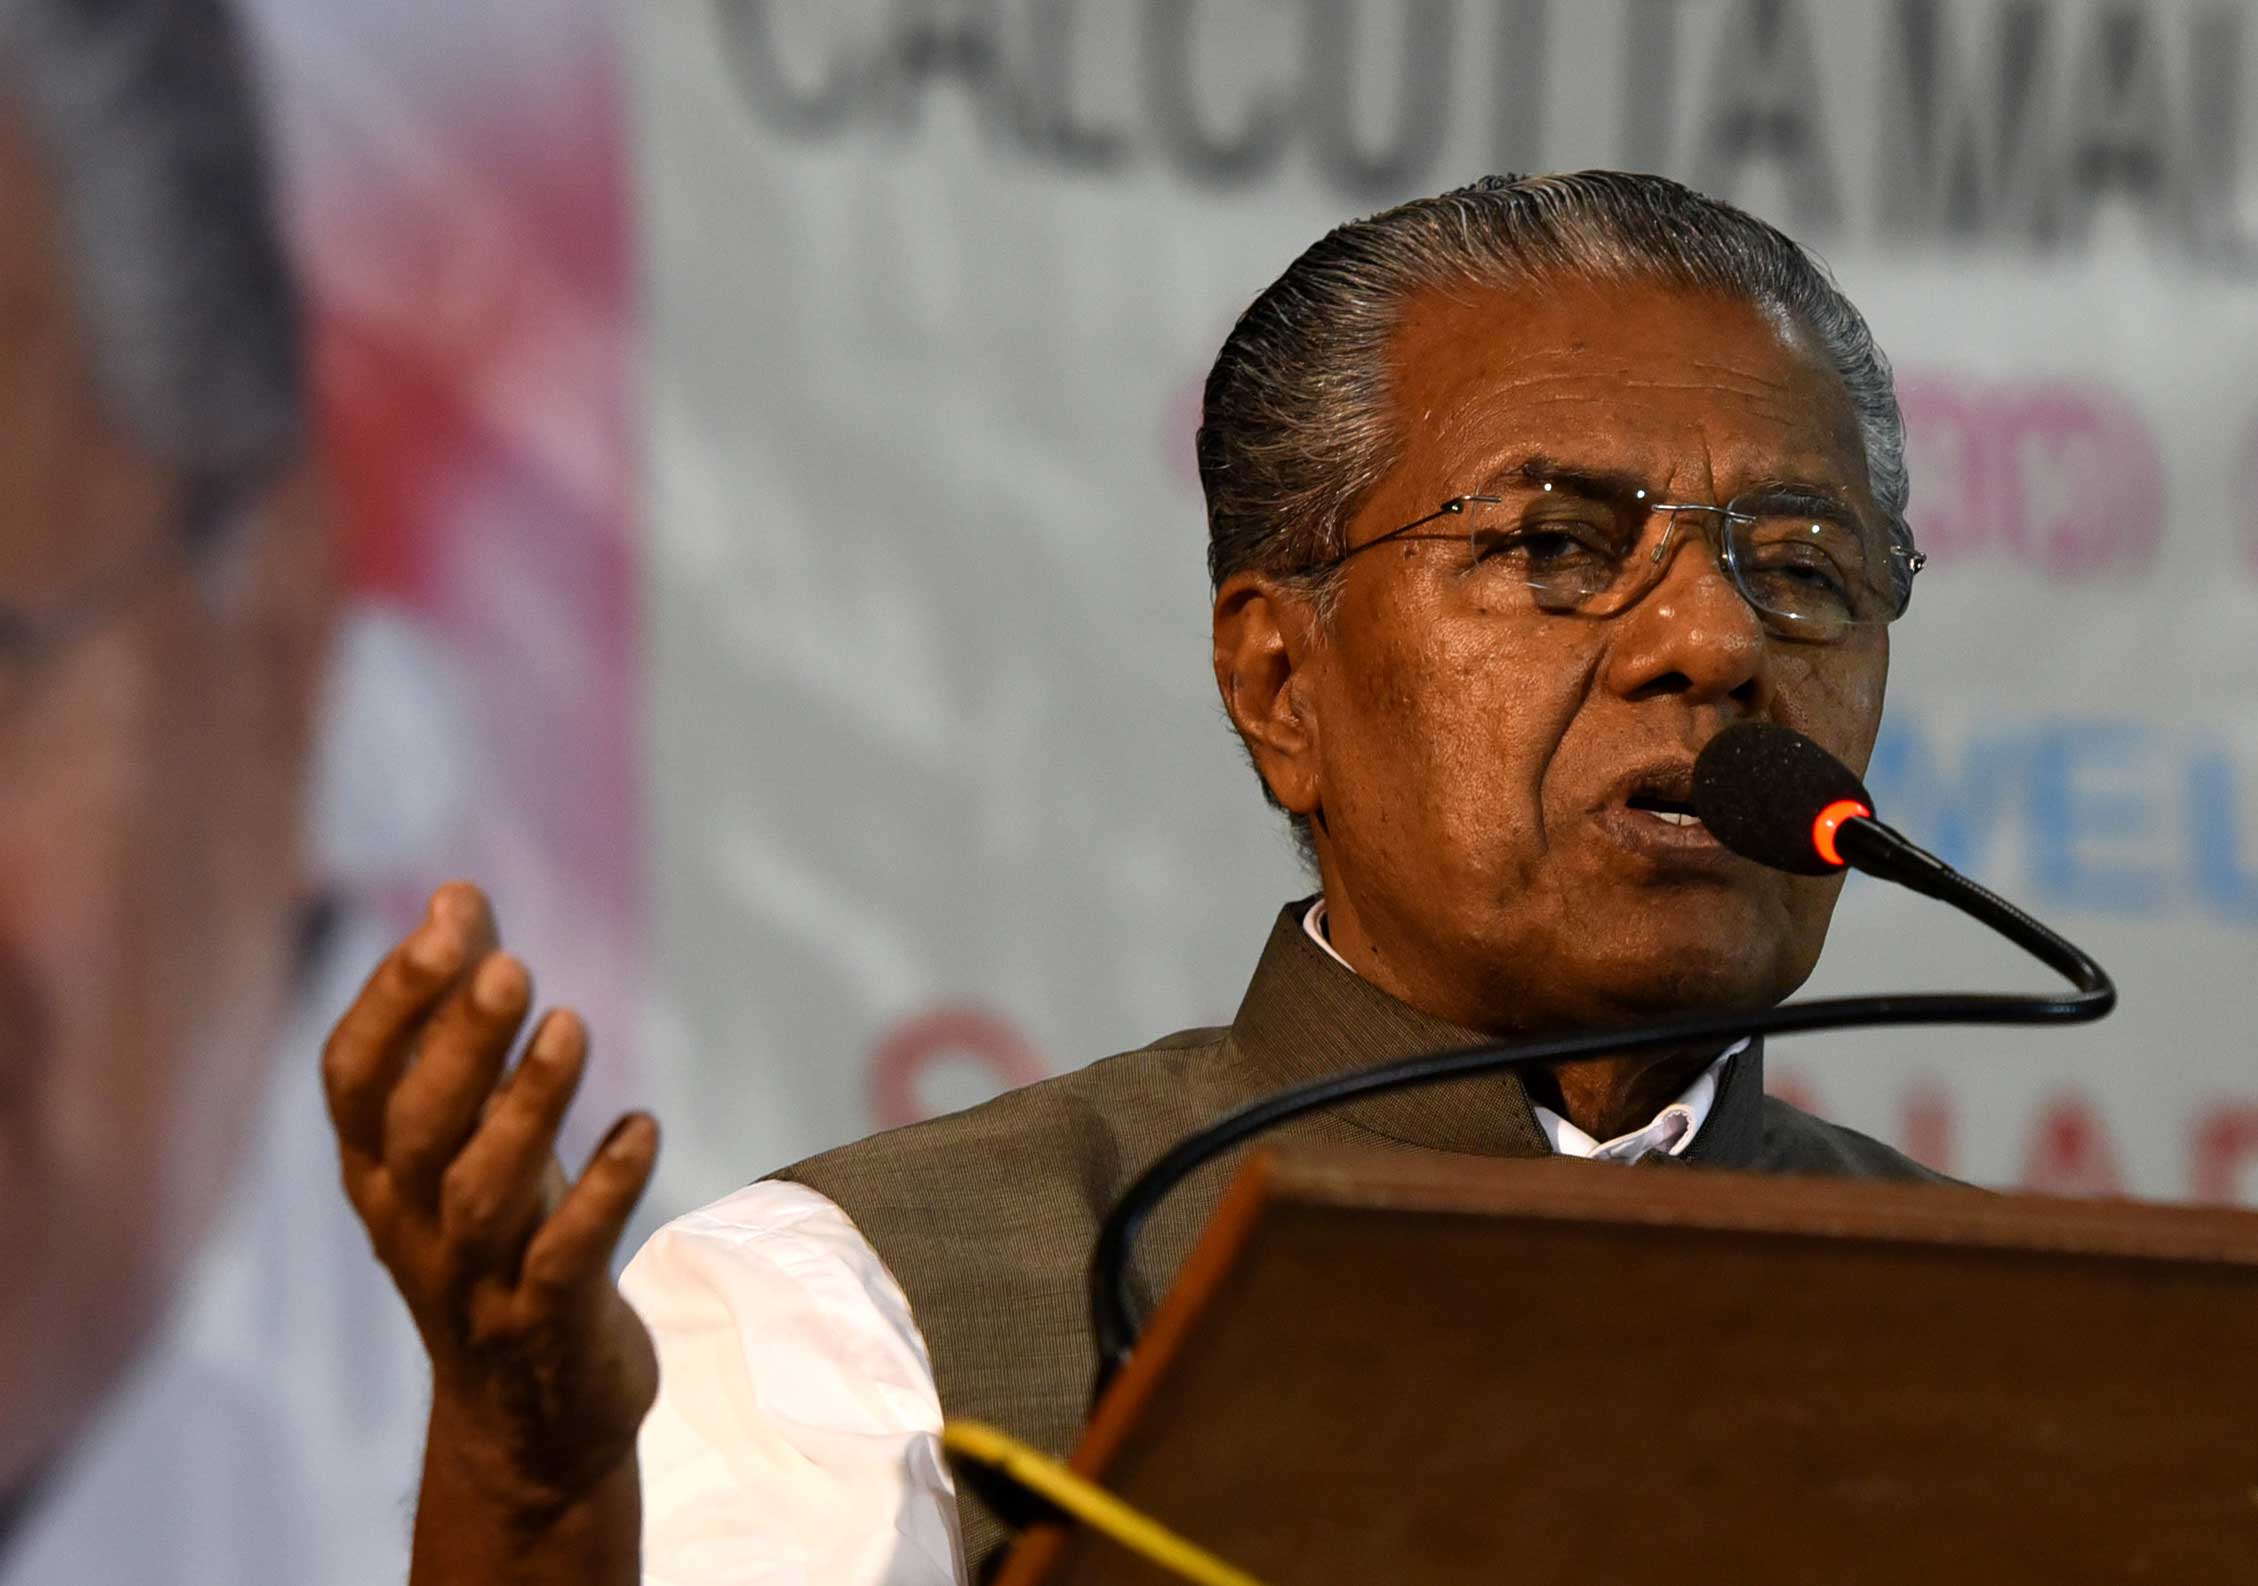 “Presently, Indian citizens or persons of Indian origin are treated as residents if they stay for 182 days or more in India. The amendment proposes to reduce this to 120 days with effect from April 1, 2021. For a resident, her/his global income is subject to tax in India,” Vijayan wrote.

